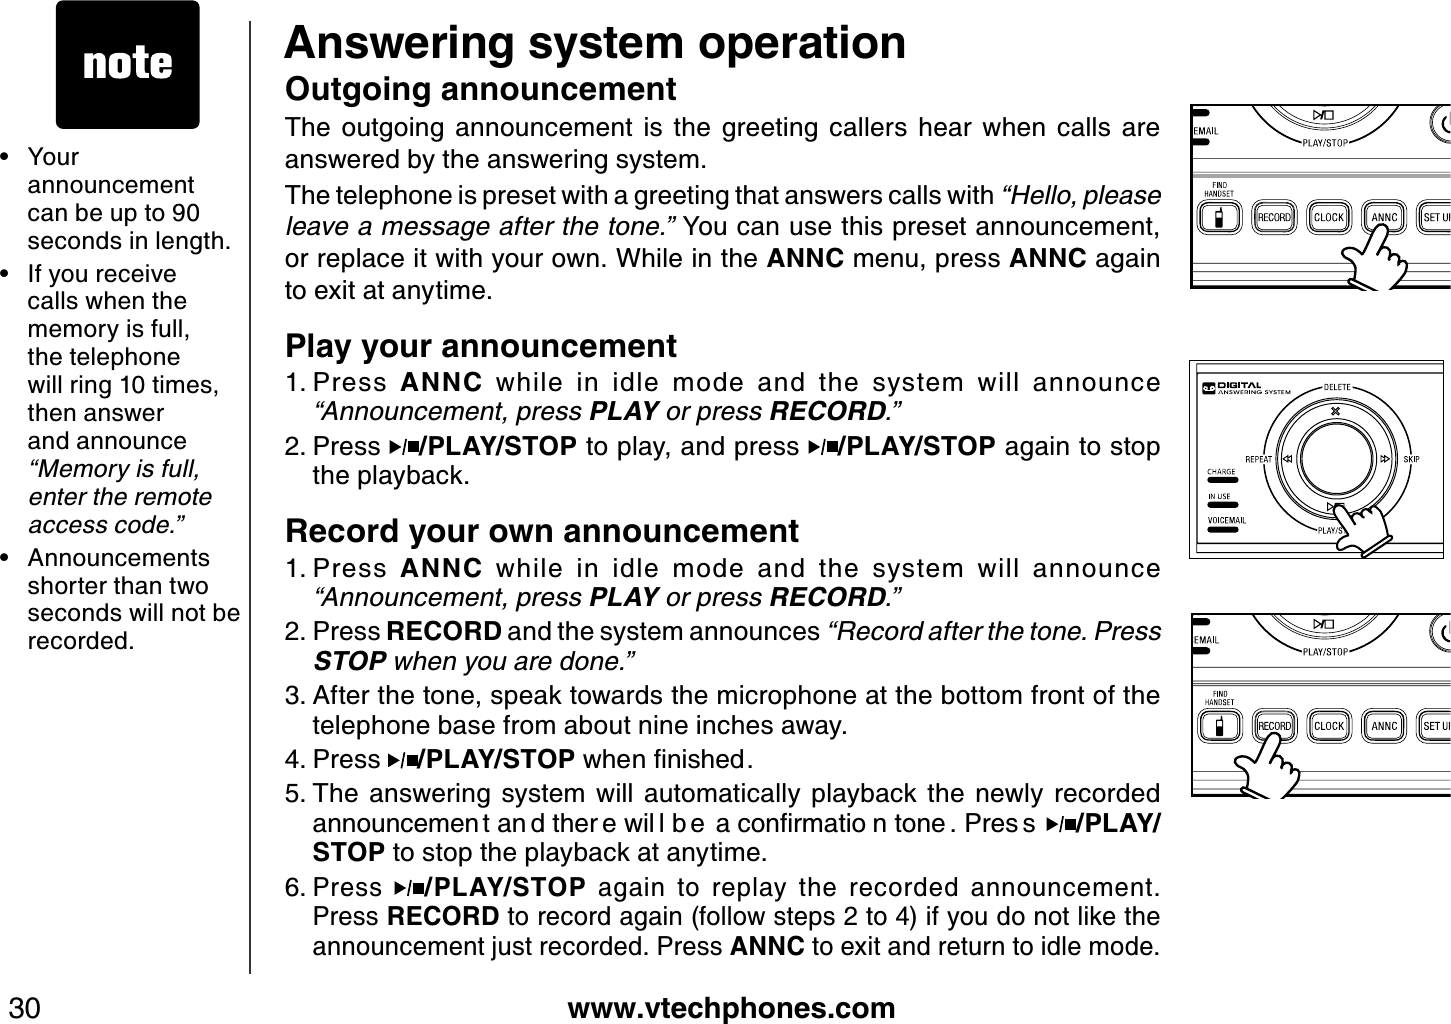 www.vtechphones.com30Answering system operationOutgoing announcementThe  outgoing  announcement  is  the  greeting  callers  hear  when  calls  are answered by the answering system.The telephone is preset with a greeting that answers calls with “Hello, please leav e a messag e after th e tone.” You can use this preset announcement, or replace it with your own. While in the ANNC menu, press ANNC again to exit at anytime.Play your announcement Press  ANNC  while  in  idle  mode  and  the  system  will  announce “A nnounc ement, press PLAY or press R E COR D.”Press /PLAY/STOP to play, and press  /PLAY/STOP again to stop the playback.  Record your own announcementPress  ANNC  while  in  idle  mode  and  the  system  will  announce “A nnounc ement, press PLAY or press R E COR D.”Press RECORD and the system announces “R ec ord after th e tone. P ress S T OP w h en you are done.”After the tone, speak towards the microphone at the bottom front of the telephone base from about nine inches away.Press  /PLAY/STOPYJGPſPKUJGFThe  answering  system  will  automatically  playback  the  newly  recorded CPPQWPEGOGP VCP FVJGT GYKN ND G CEQPſTOCVKQ PVQPG 2TGU U /PLAY/STOP to stop the playback at anytime.Press  /PLAY/STOP  again  to  replay  the  recorded  announcement. Press RECORD to record again (follow steps 2 to 4) if you do not like the announcement just recorded. Press ANNC to exit and return to idle mode.1.2.1.2.3.4.5.6.• Your  announcement can be up to 90 seconds in length.If you receive calls when the memory is full, the telephone  will ring 10 times, then answer and announce “M emory is full, enter th e remote ac c ess c ode.”Announcements shorter than two seconds will not be recorded.••